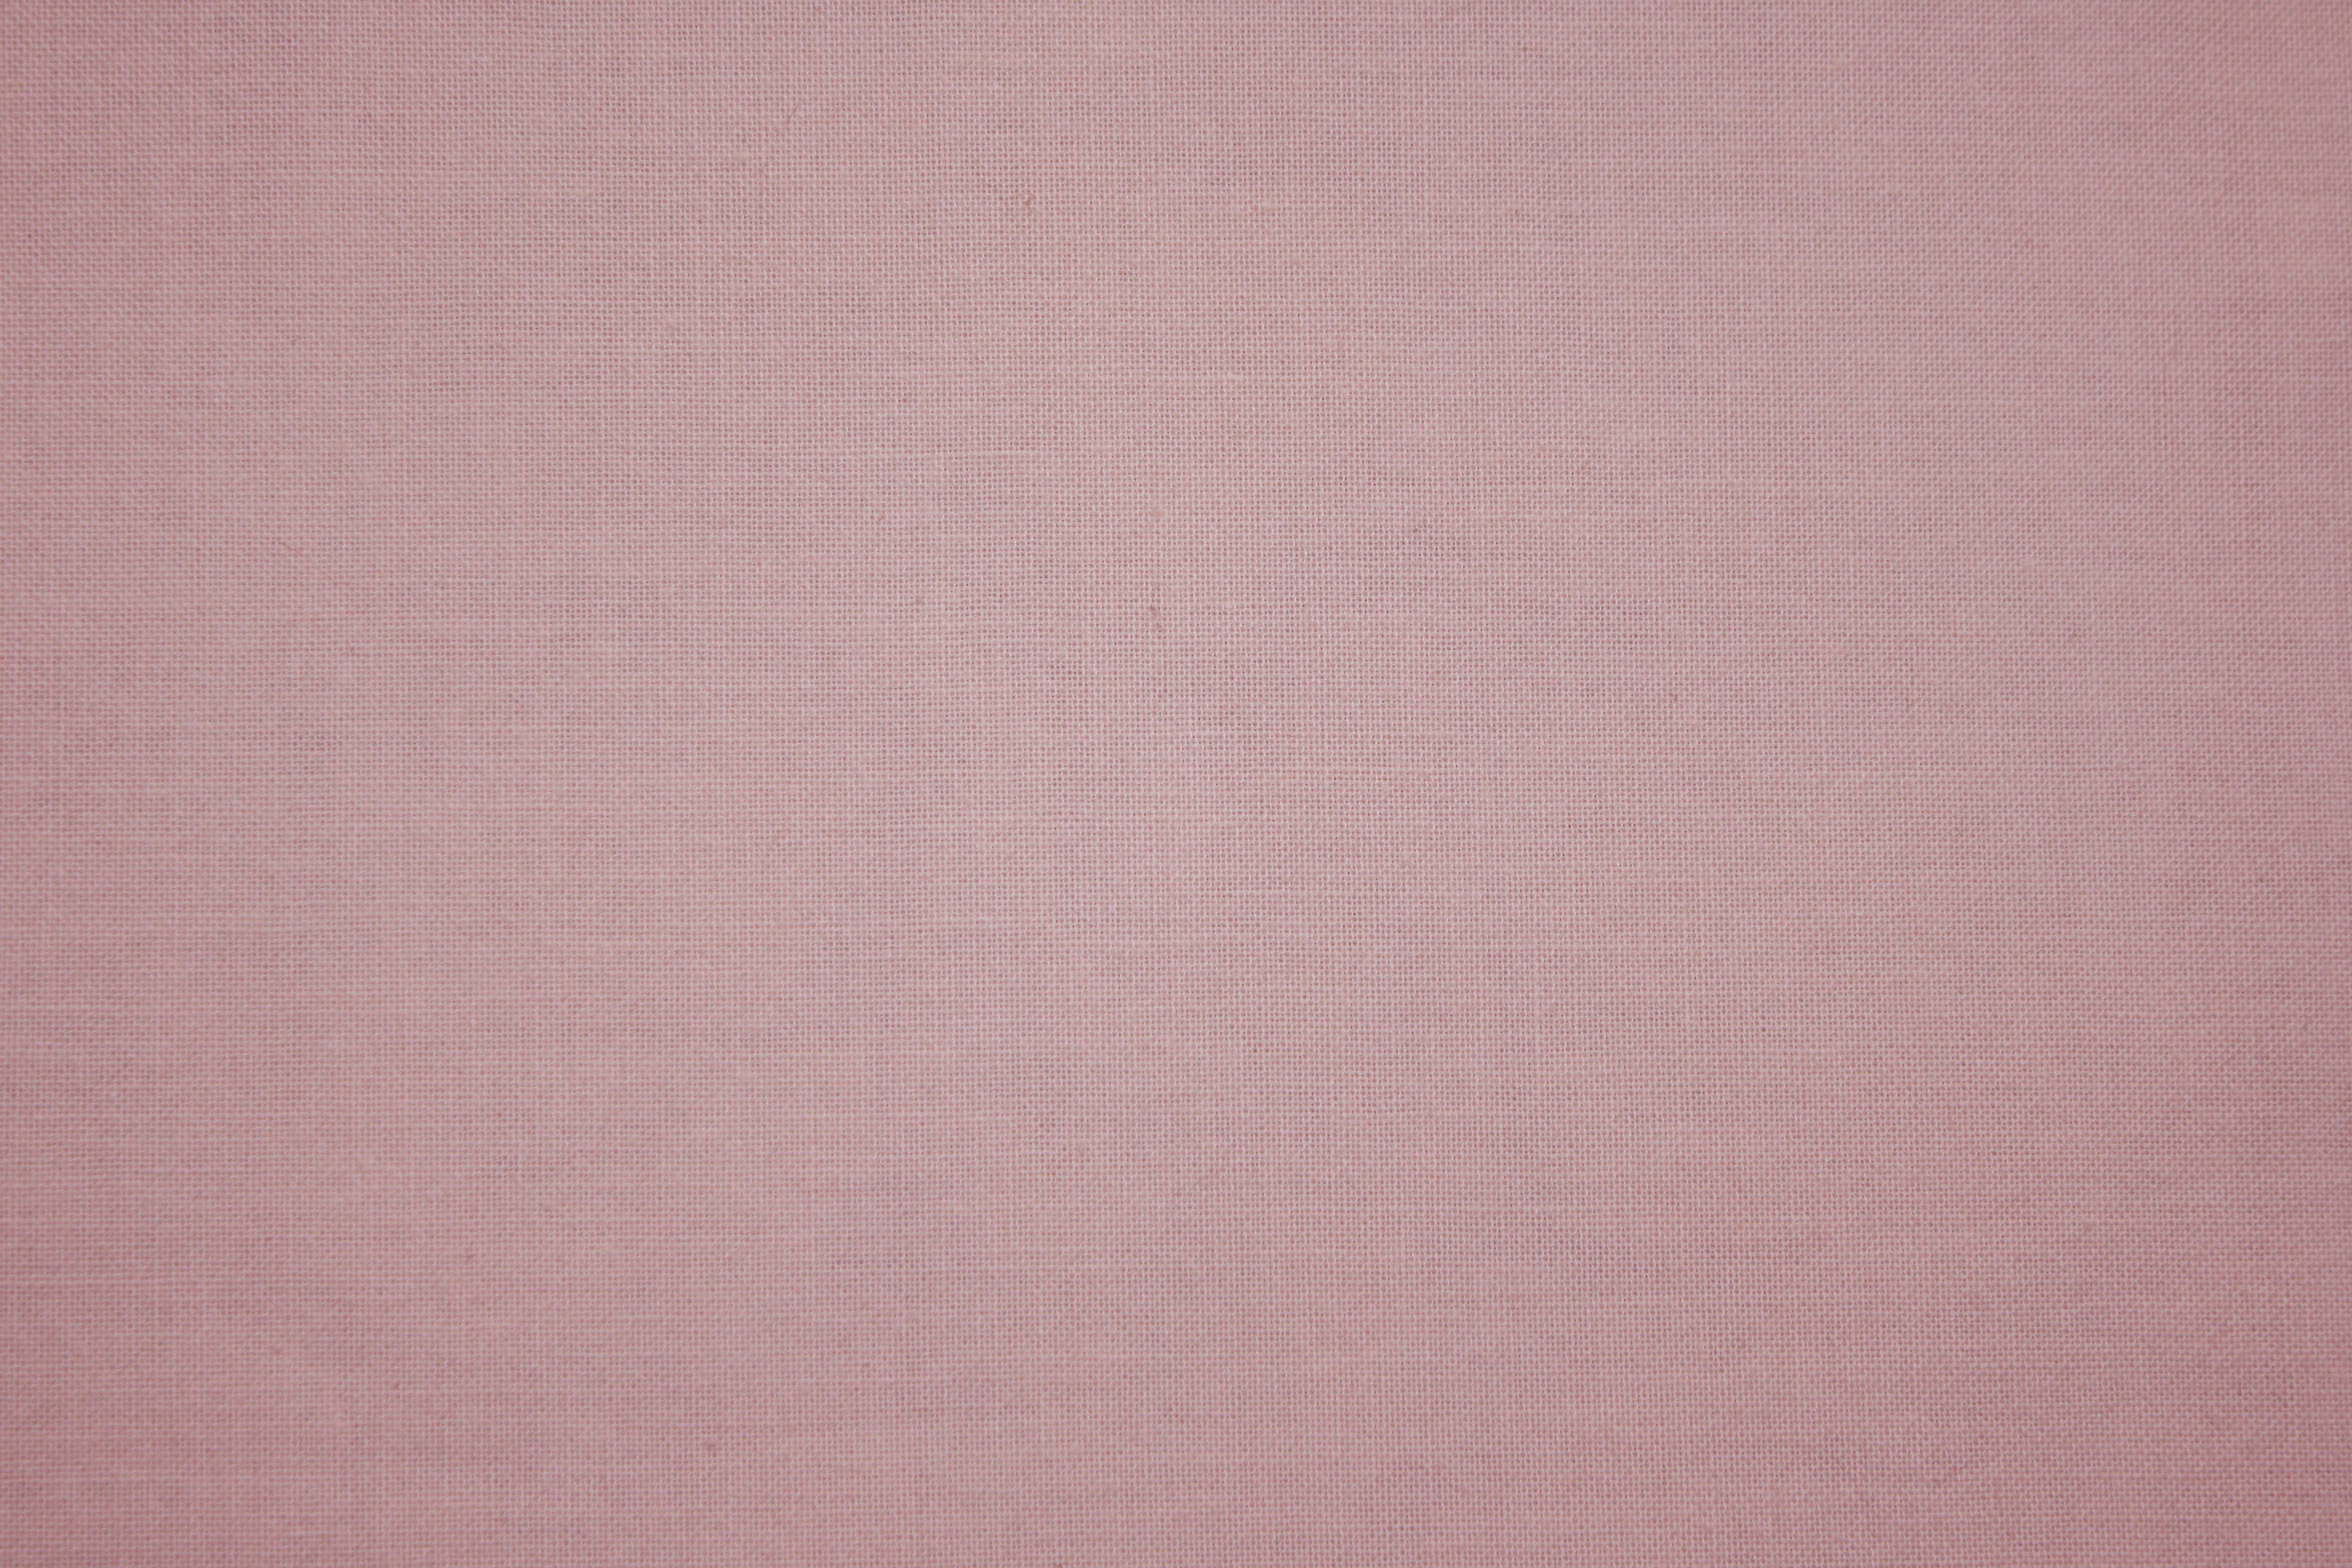 Dusty Rose Canvas Fabric Texture. Pink and grey wallpaper, Dusty rose, Summer color palettes